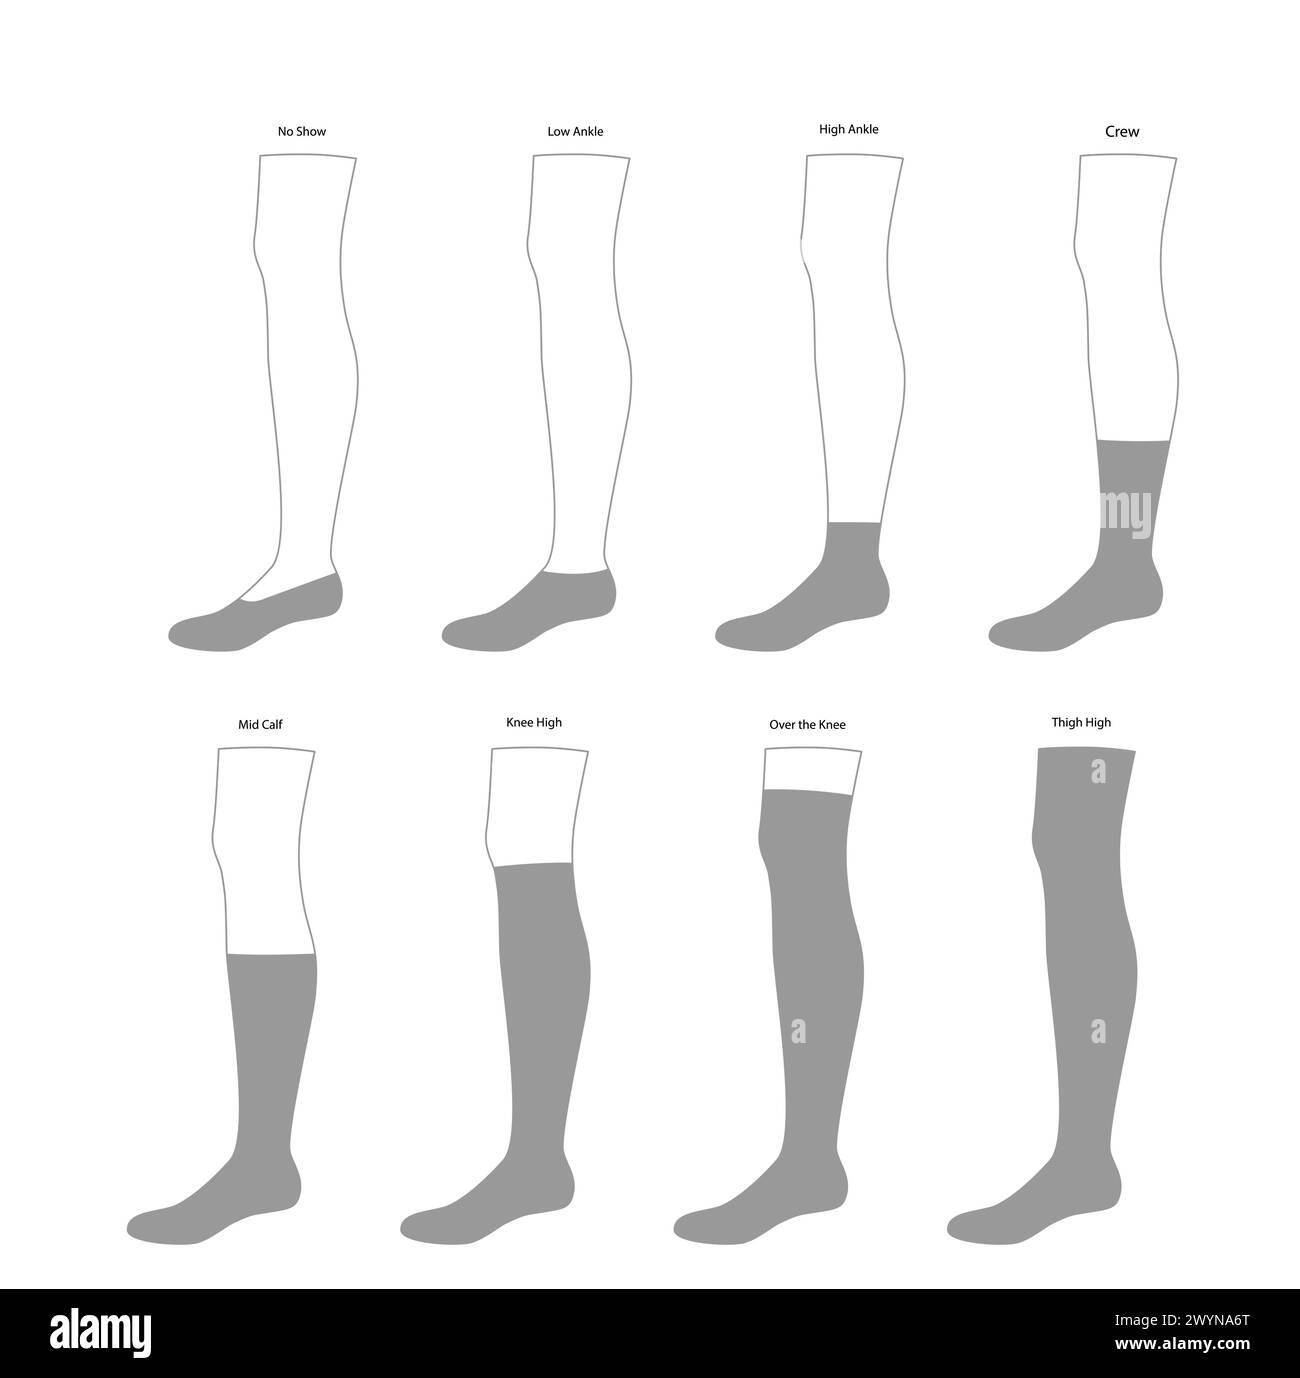 Set of Socks hosiery - No Show, low, high ankle, crew, mid calf, knee high, thigh length. Fashion accessory clothing technical illustration stocking. Vector side view for Men, women style, flat CAD Stock Vector